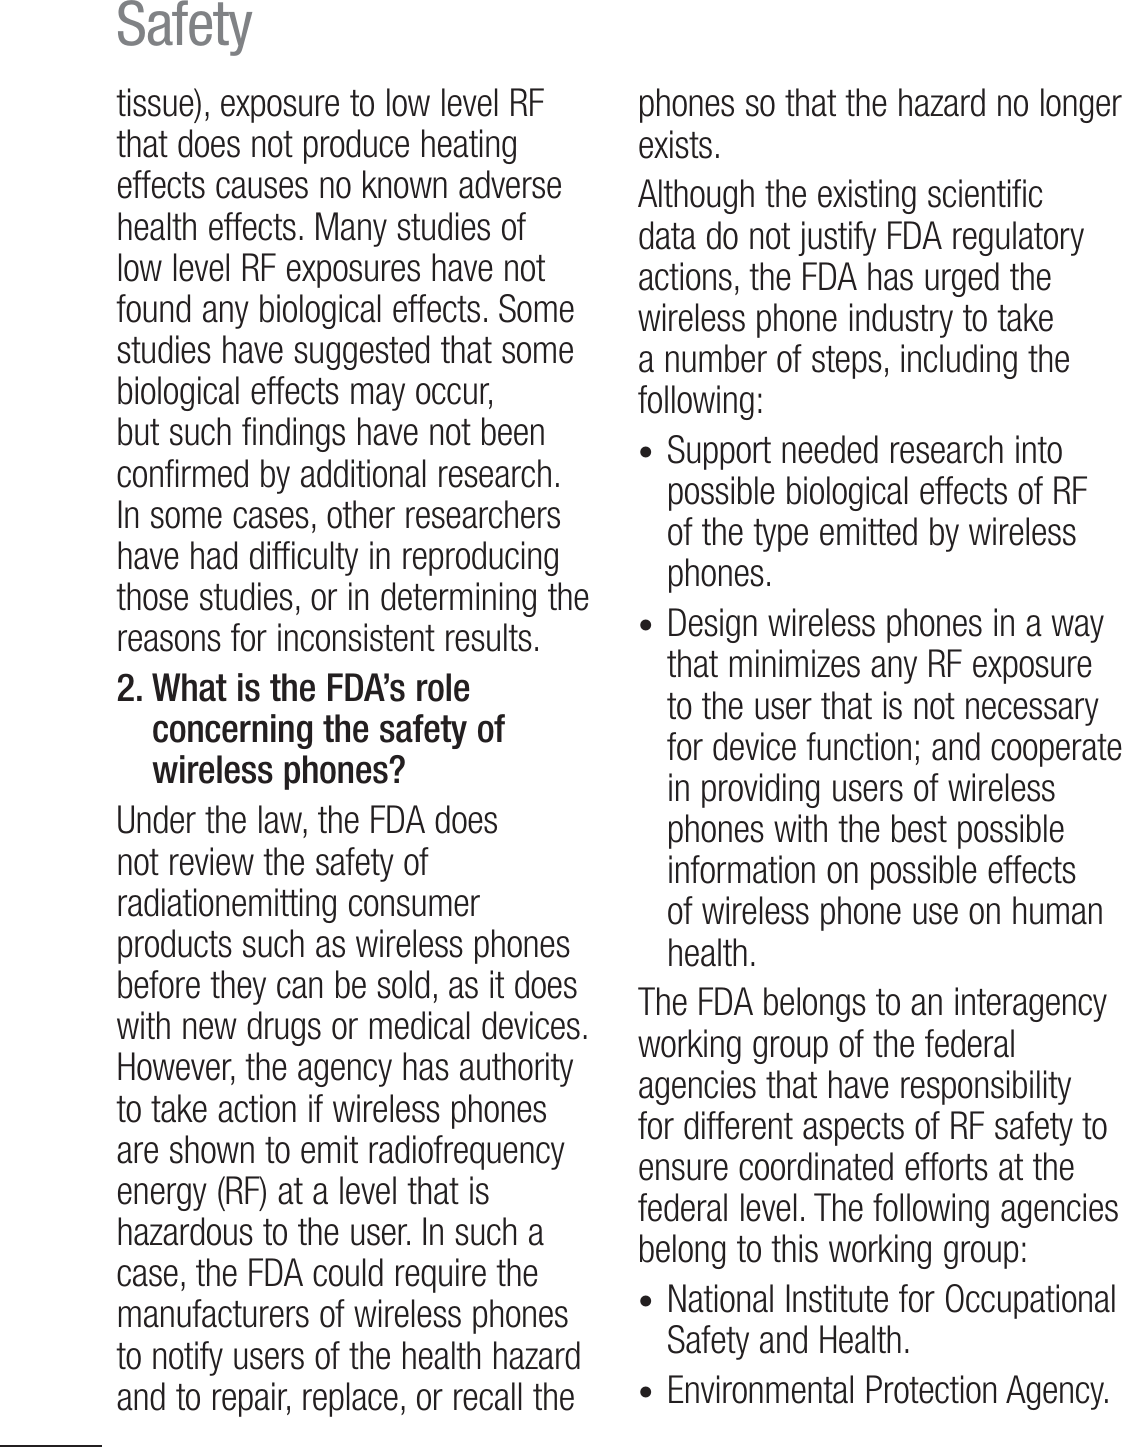 12Safetytissue), exposure to low level RF that does not produce heating effects causes no known adverse health effects. Many studies of low level RF exposures have not found any biological effects. Some studies have suggested that some biological effects may occur, but such findings have not been confirmed by additional research. In some cases, other researchers have had difficulty in reproducing those studies, or in determining the reasons for inconsistent results.2.  What is the FDA’s role concerning the safety of wireless phones?Under the law, the FDA does not review the safety of radiationemitting consumer products such as wireless phones before they can be sold, as it does with new drugs or medical devices. )PXFWFSUIFBHFODZIBTBVUIPSJUZto take action if wireless phones are shown to emit radiofrequency energy (RF) at a level that is hazardous to the user. In such a case, the FDA could require the manufacturers of wireless phones to notify users of the health hazard and to repair, replace, or recall the phones so that the hazard no longer exists.Although the existing scientific data do not justify FDA regulatory actions, the FDA has urged the wireless phone industry to take a number of steps, including the following:t Support needed research into possible biological effects of RF of the type emitted by wireless phones.t Design wireless phones in a way that minimizes any RF exposure to the user that is not necessary for device function; and cooperate in providing users of wireless phones with the best possible information on possible effects of wireless phone use on human health. The FDA belongs to an interagency working group of the federal agencies that have responsibility for different aspects of RF safety to ensure coordinated efforts at the federal level. The following agencies belong to this working group:t  National Institute for Occupational 4BGFUZBOE)FBMUIt  Environmental  Protection  Agency.